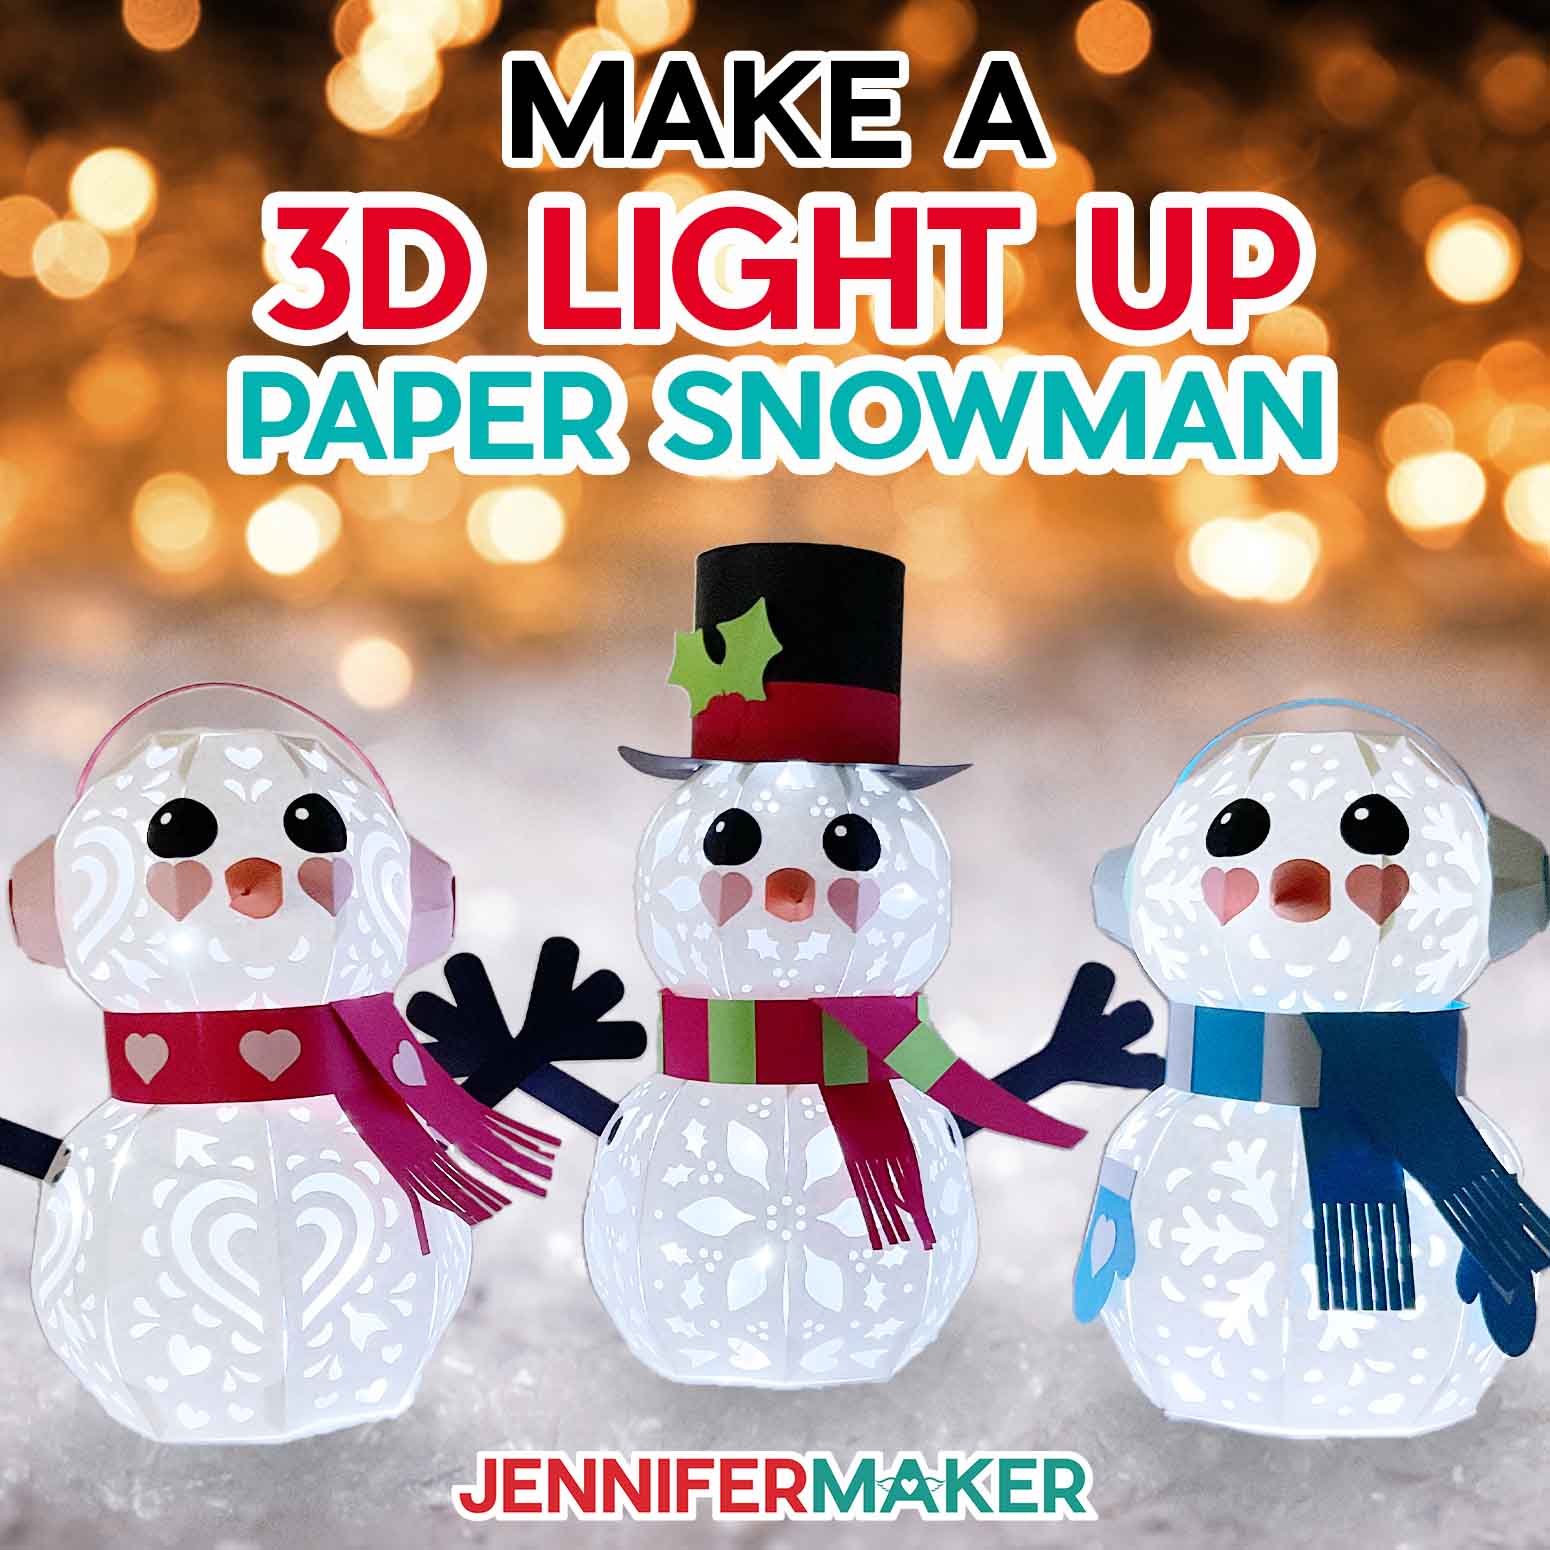 Light Up Snowman Designs in 3D for Christmas, Valentine’s Day, & Winter!